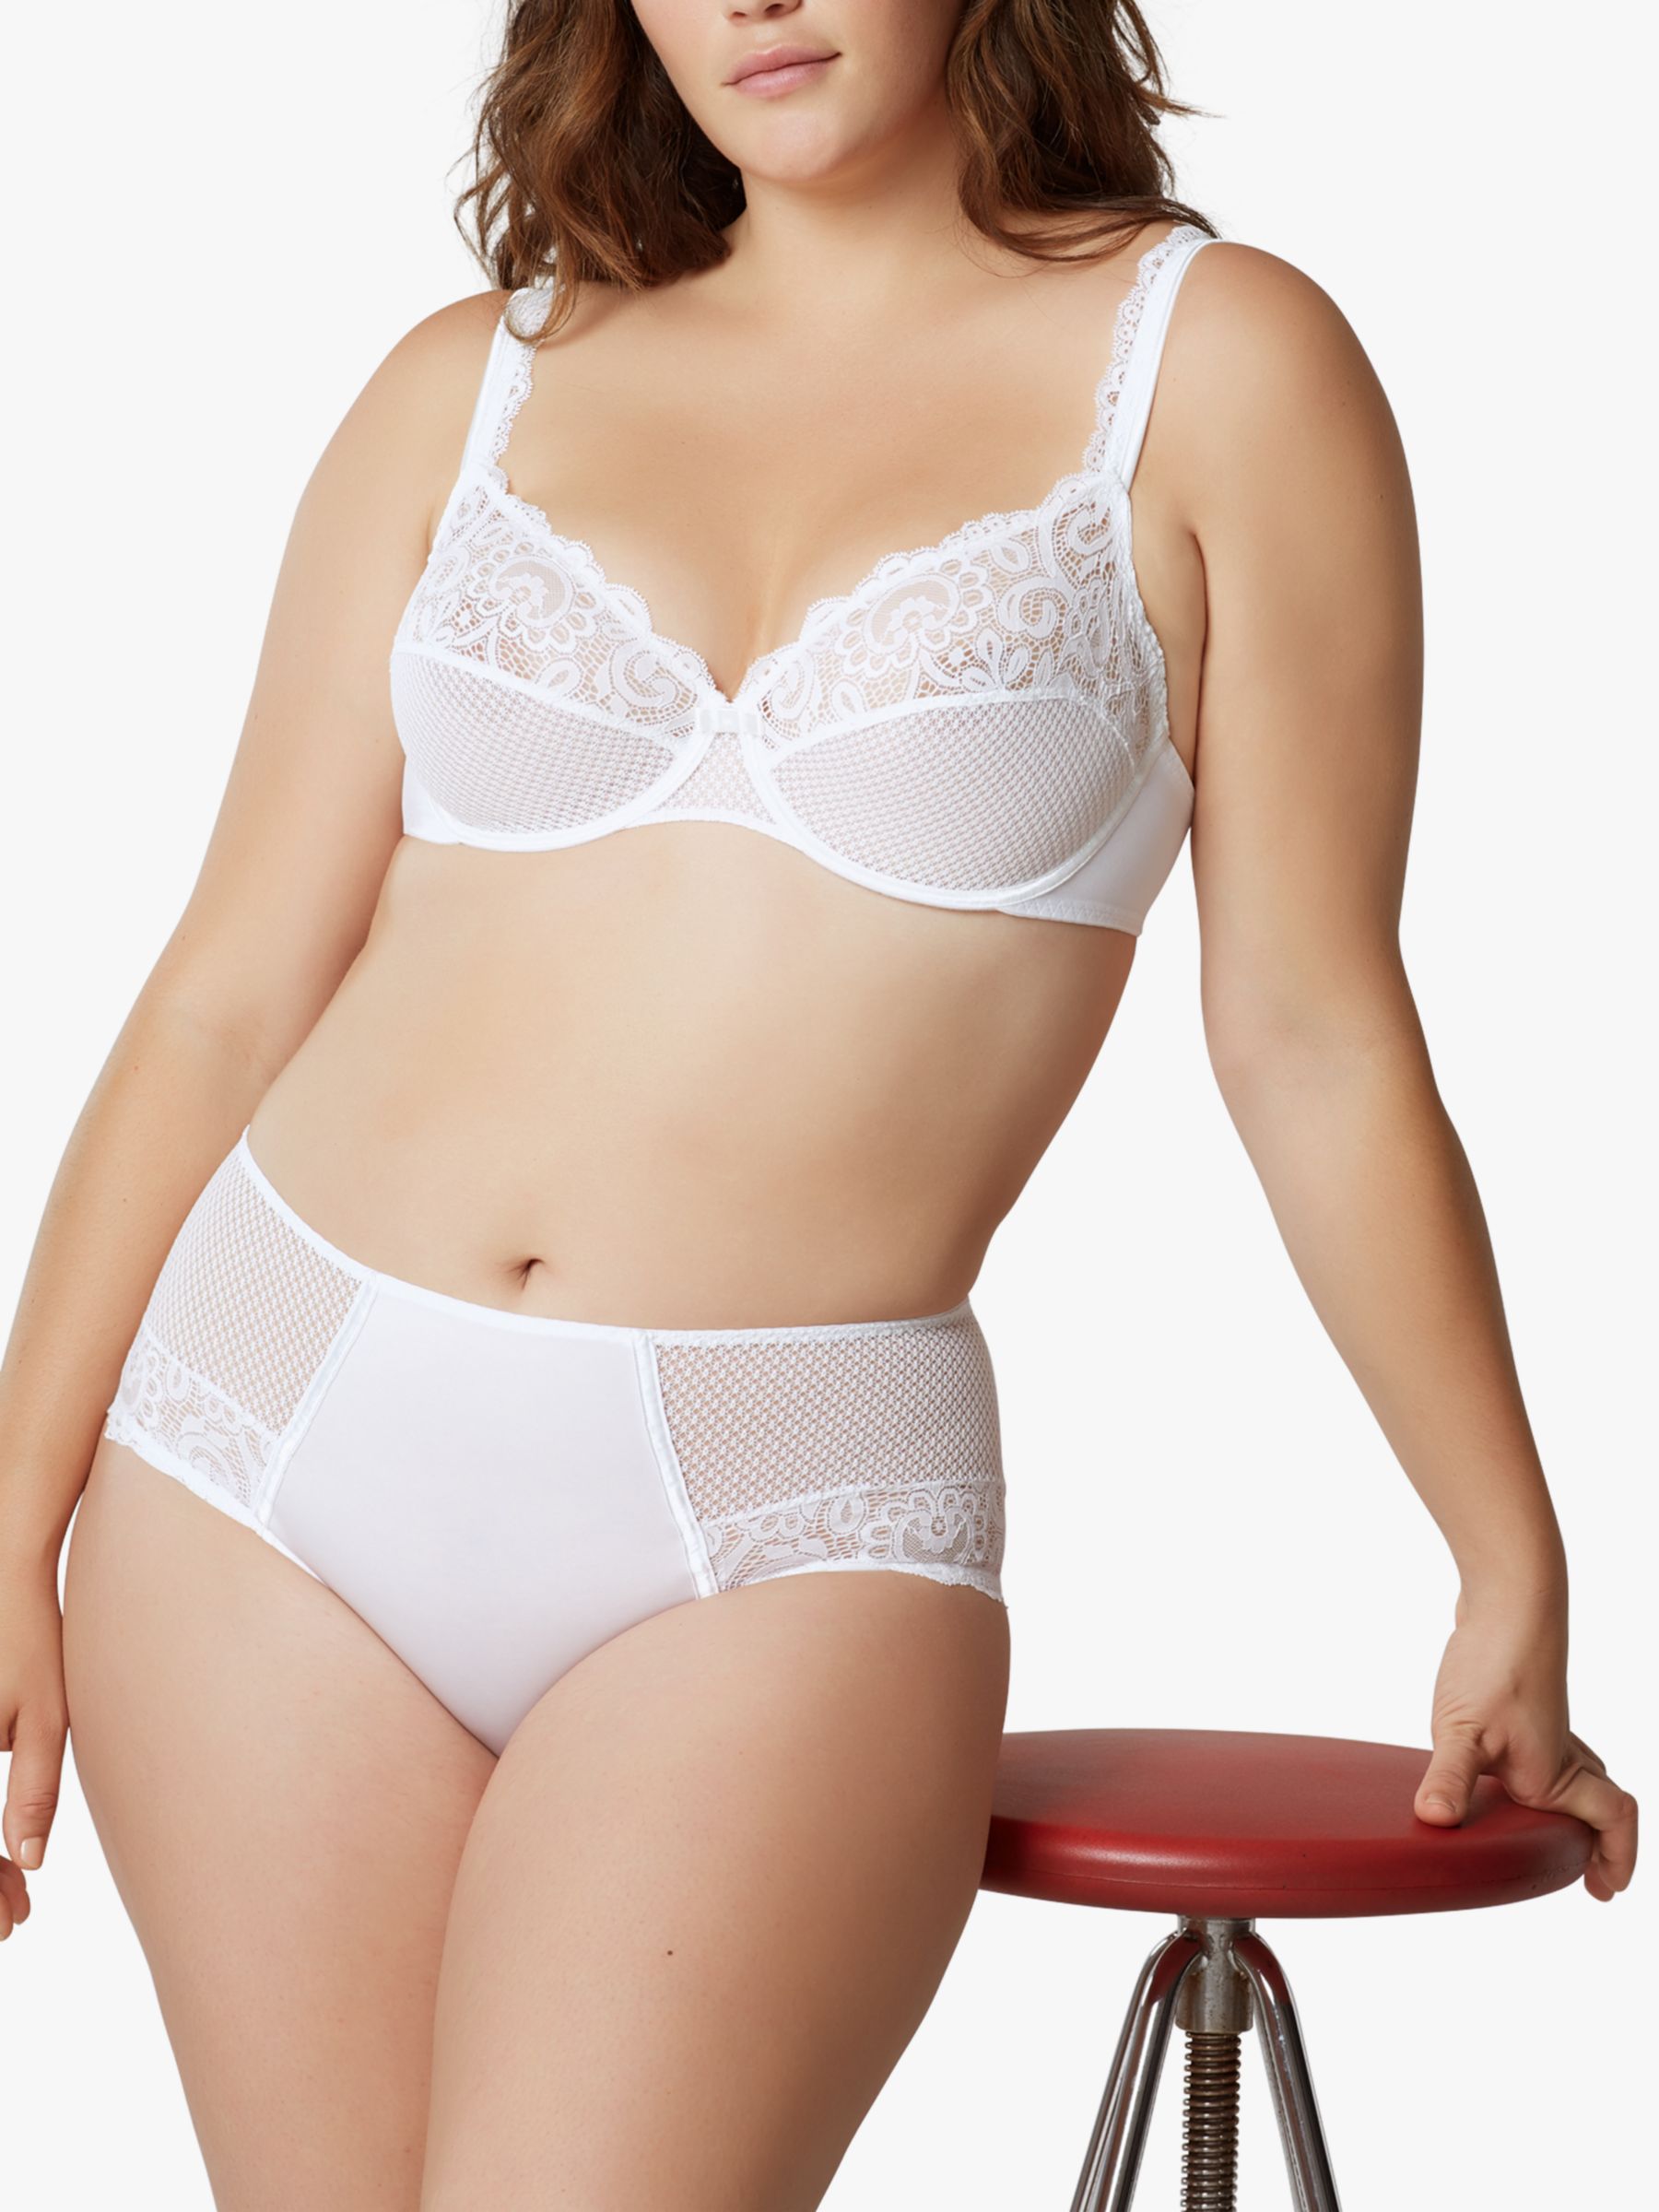 Maison Lejaby Gaby Full Cup Underwired Bra, Blanc at John Lewis & Partners